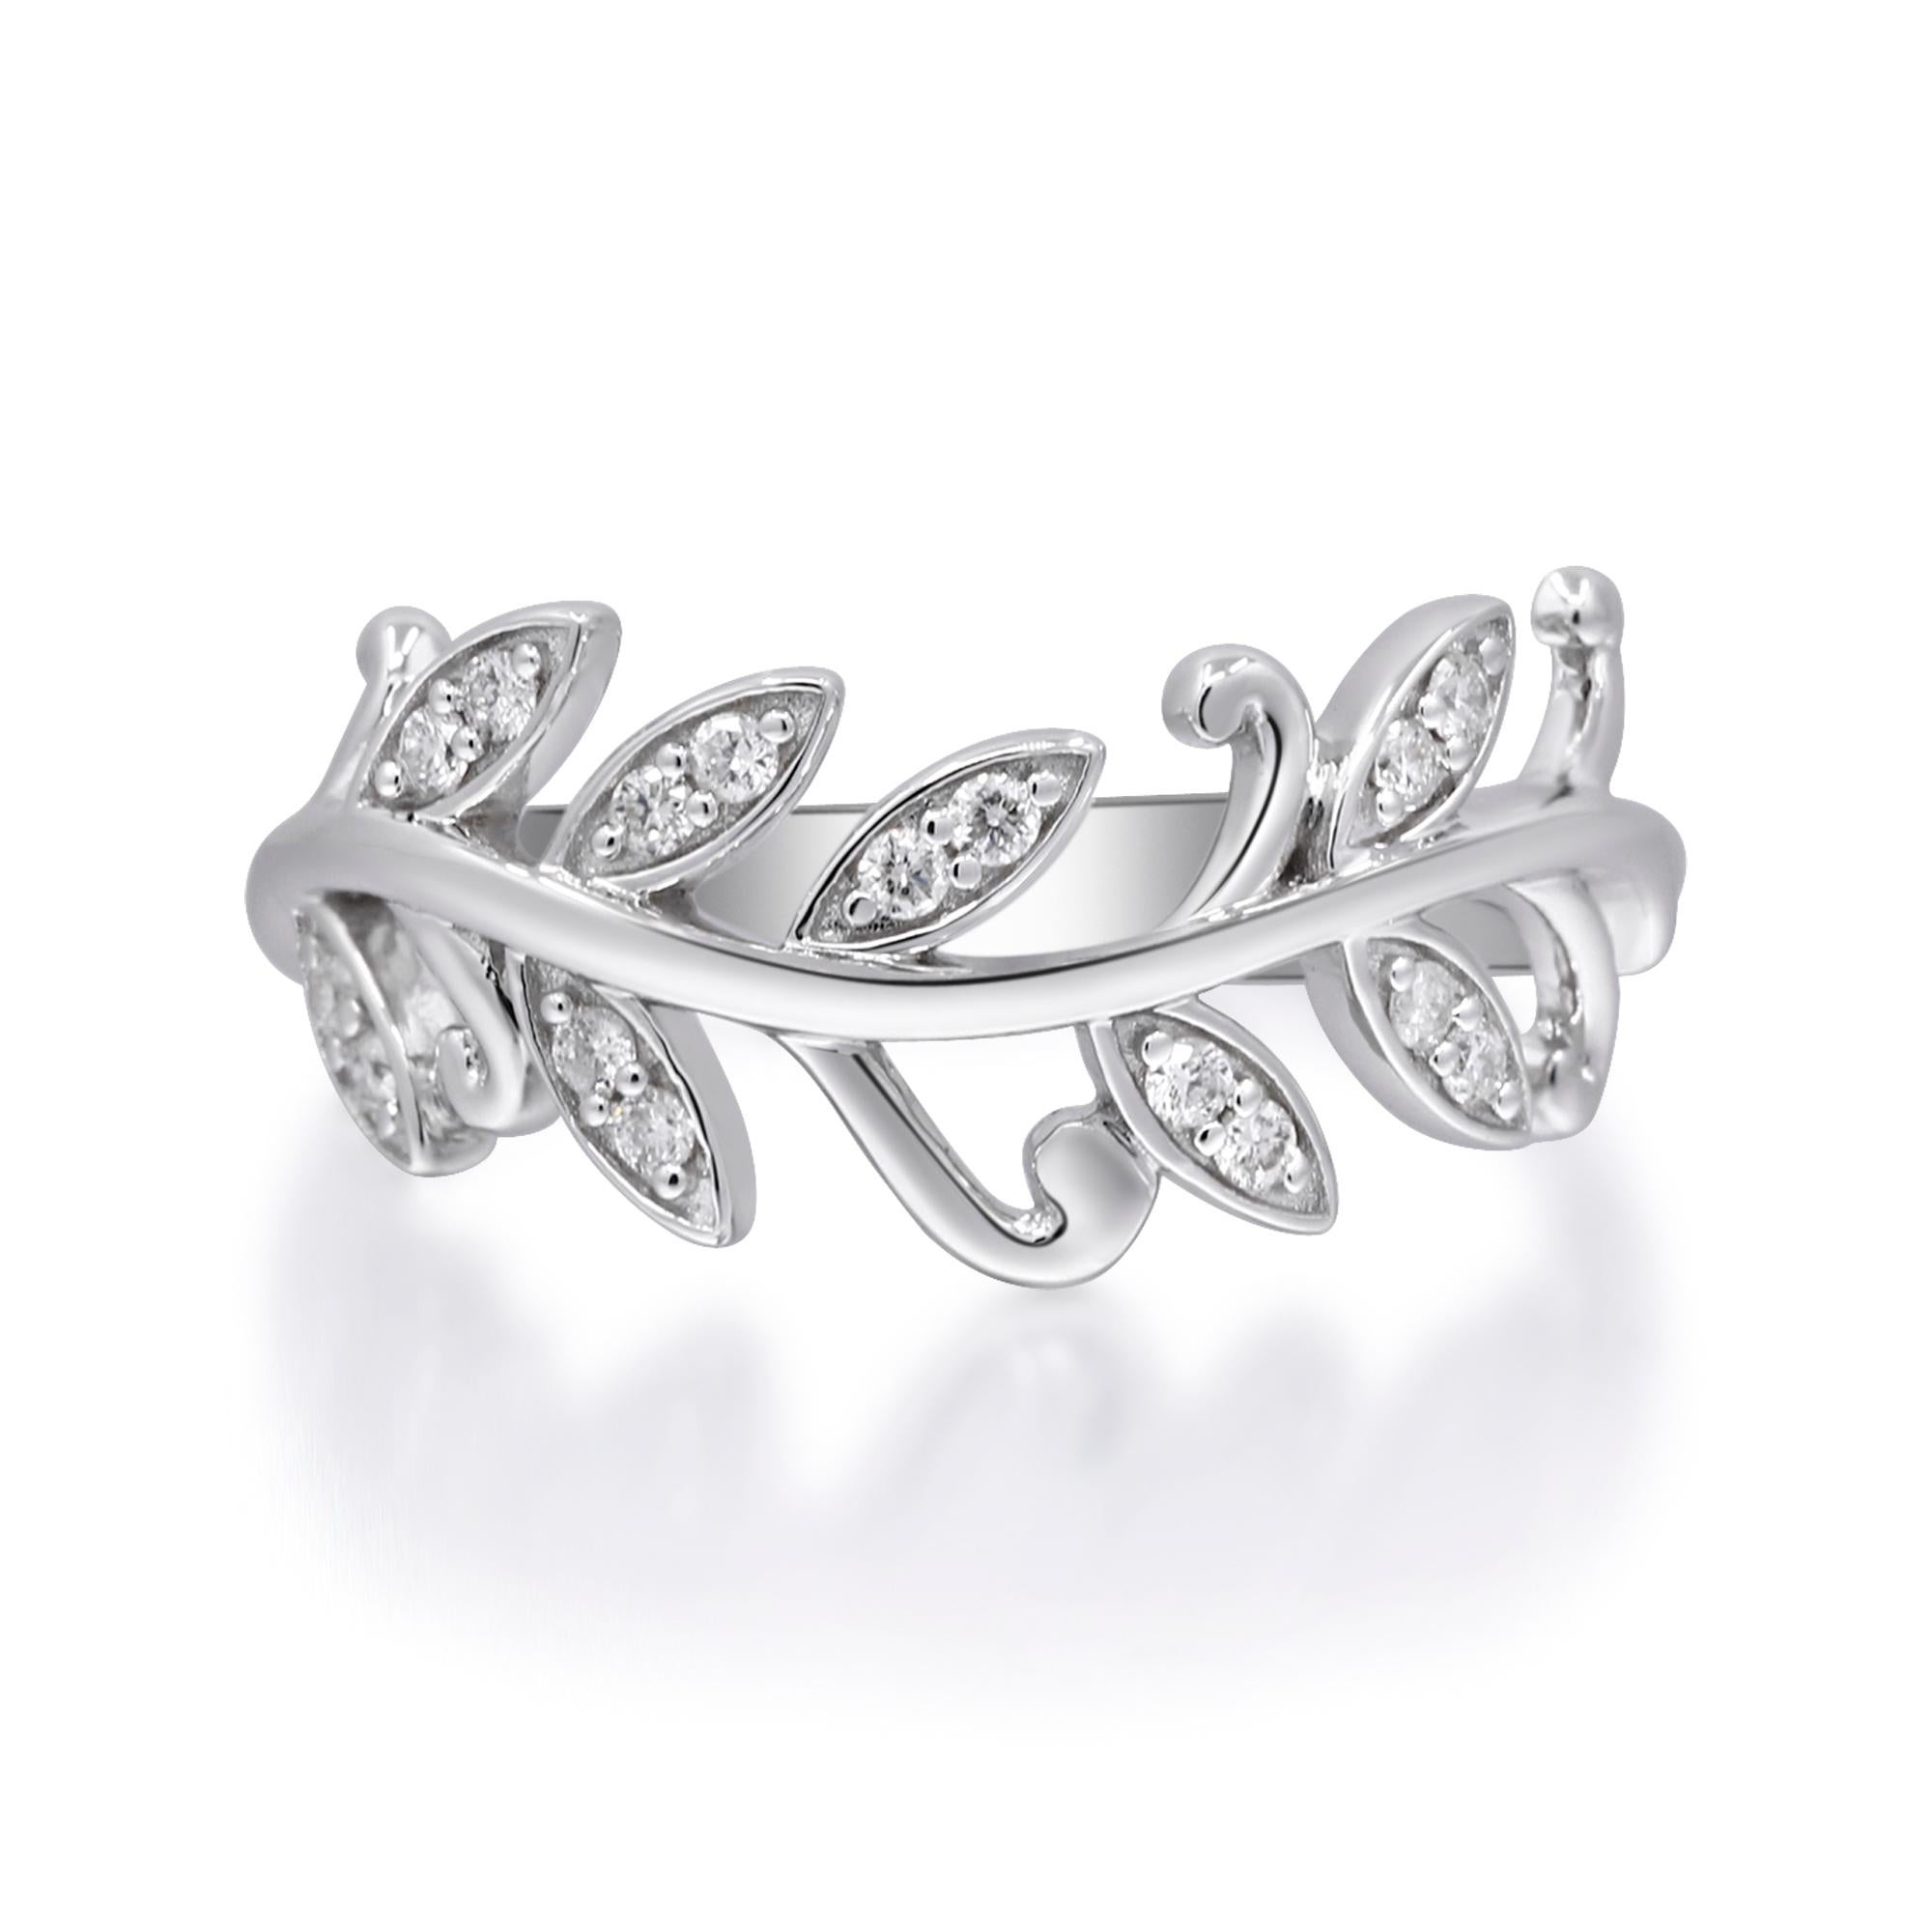 Stunning, timeless and classy eternity Unique Ring. Decorate yourself in luxury with this Gin & Grace Ring. The 925 Sterling Silver jewelry boasts with Round-cut (16 pcs) 0.14 carat White Diamond accent stones for a lovely design. This Ring is